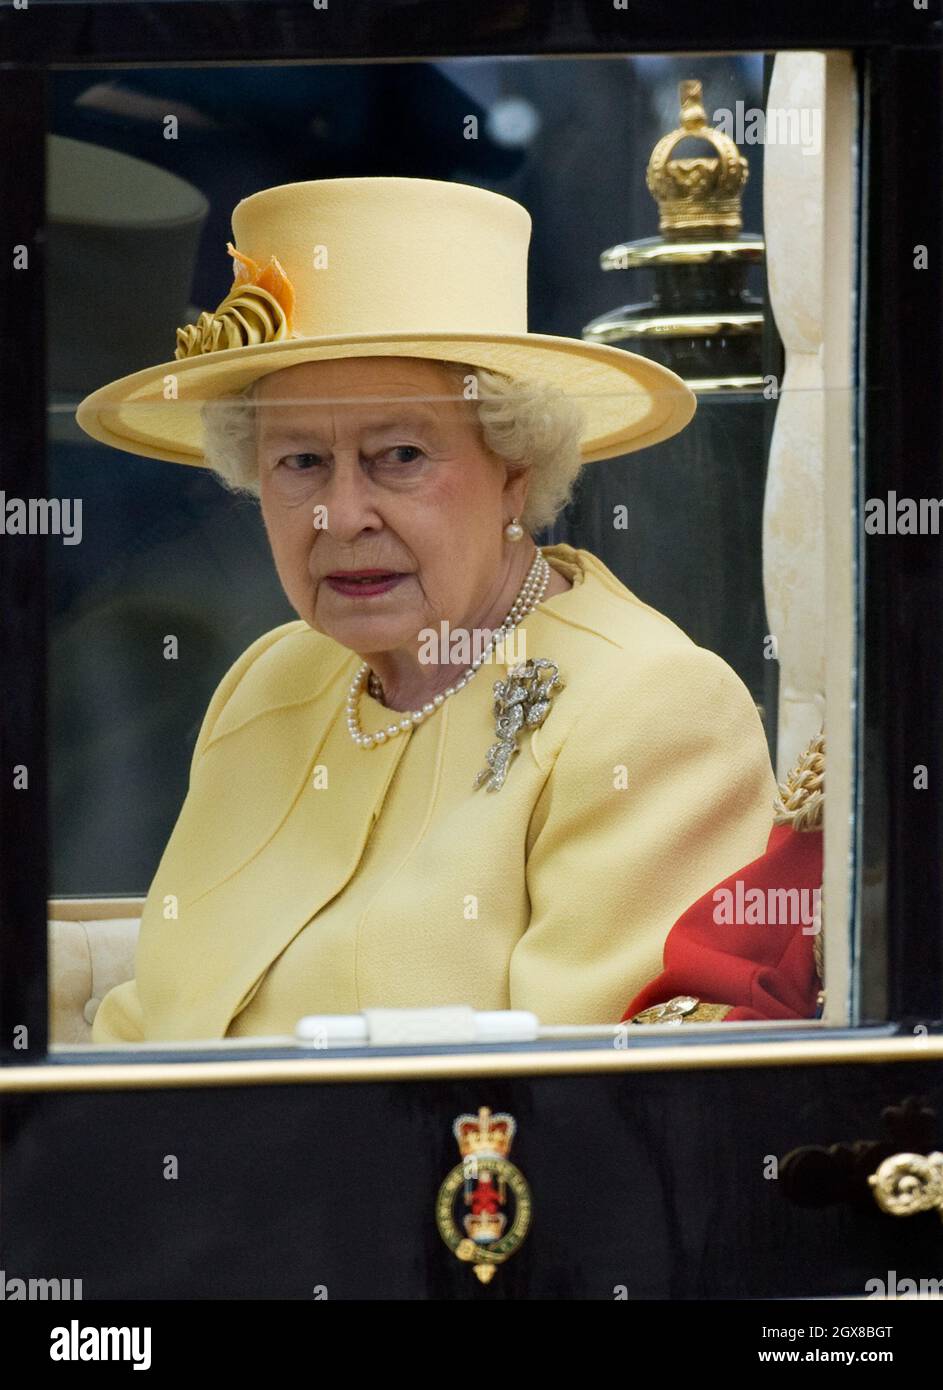 Queen Elizabeth ll leaves following the Wedding of Prince William and Catherine Middleton at Westminster Abbey on April 29, 2011. Stock Photo